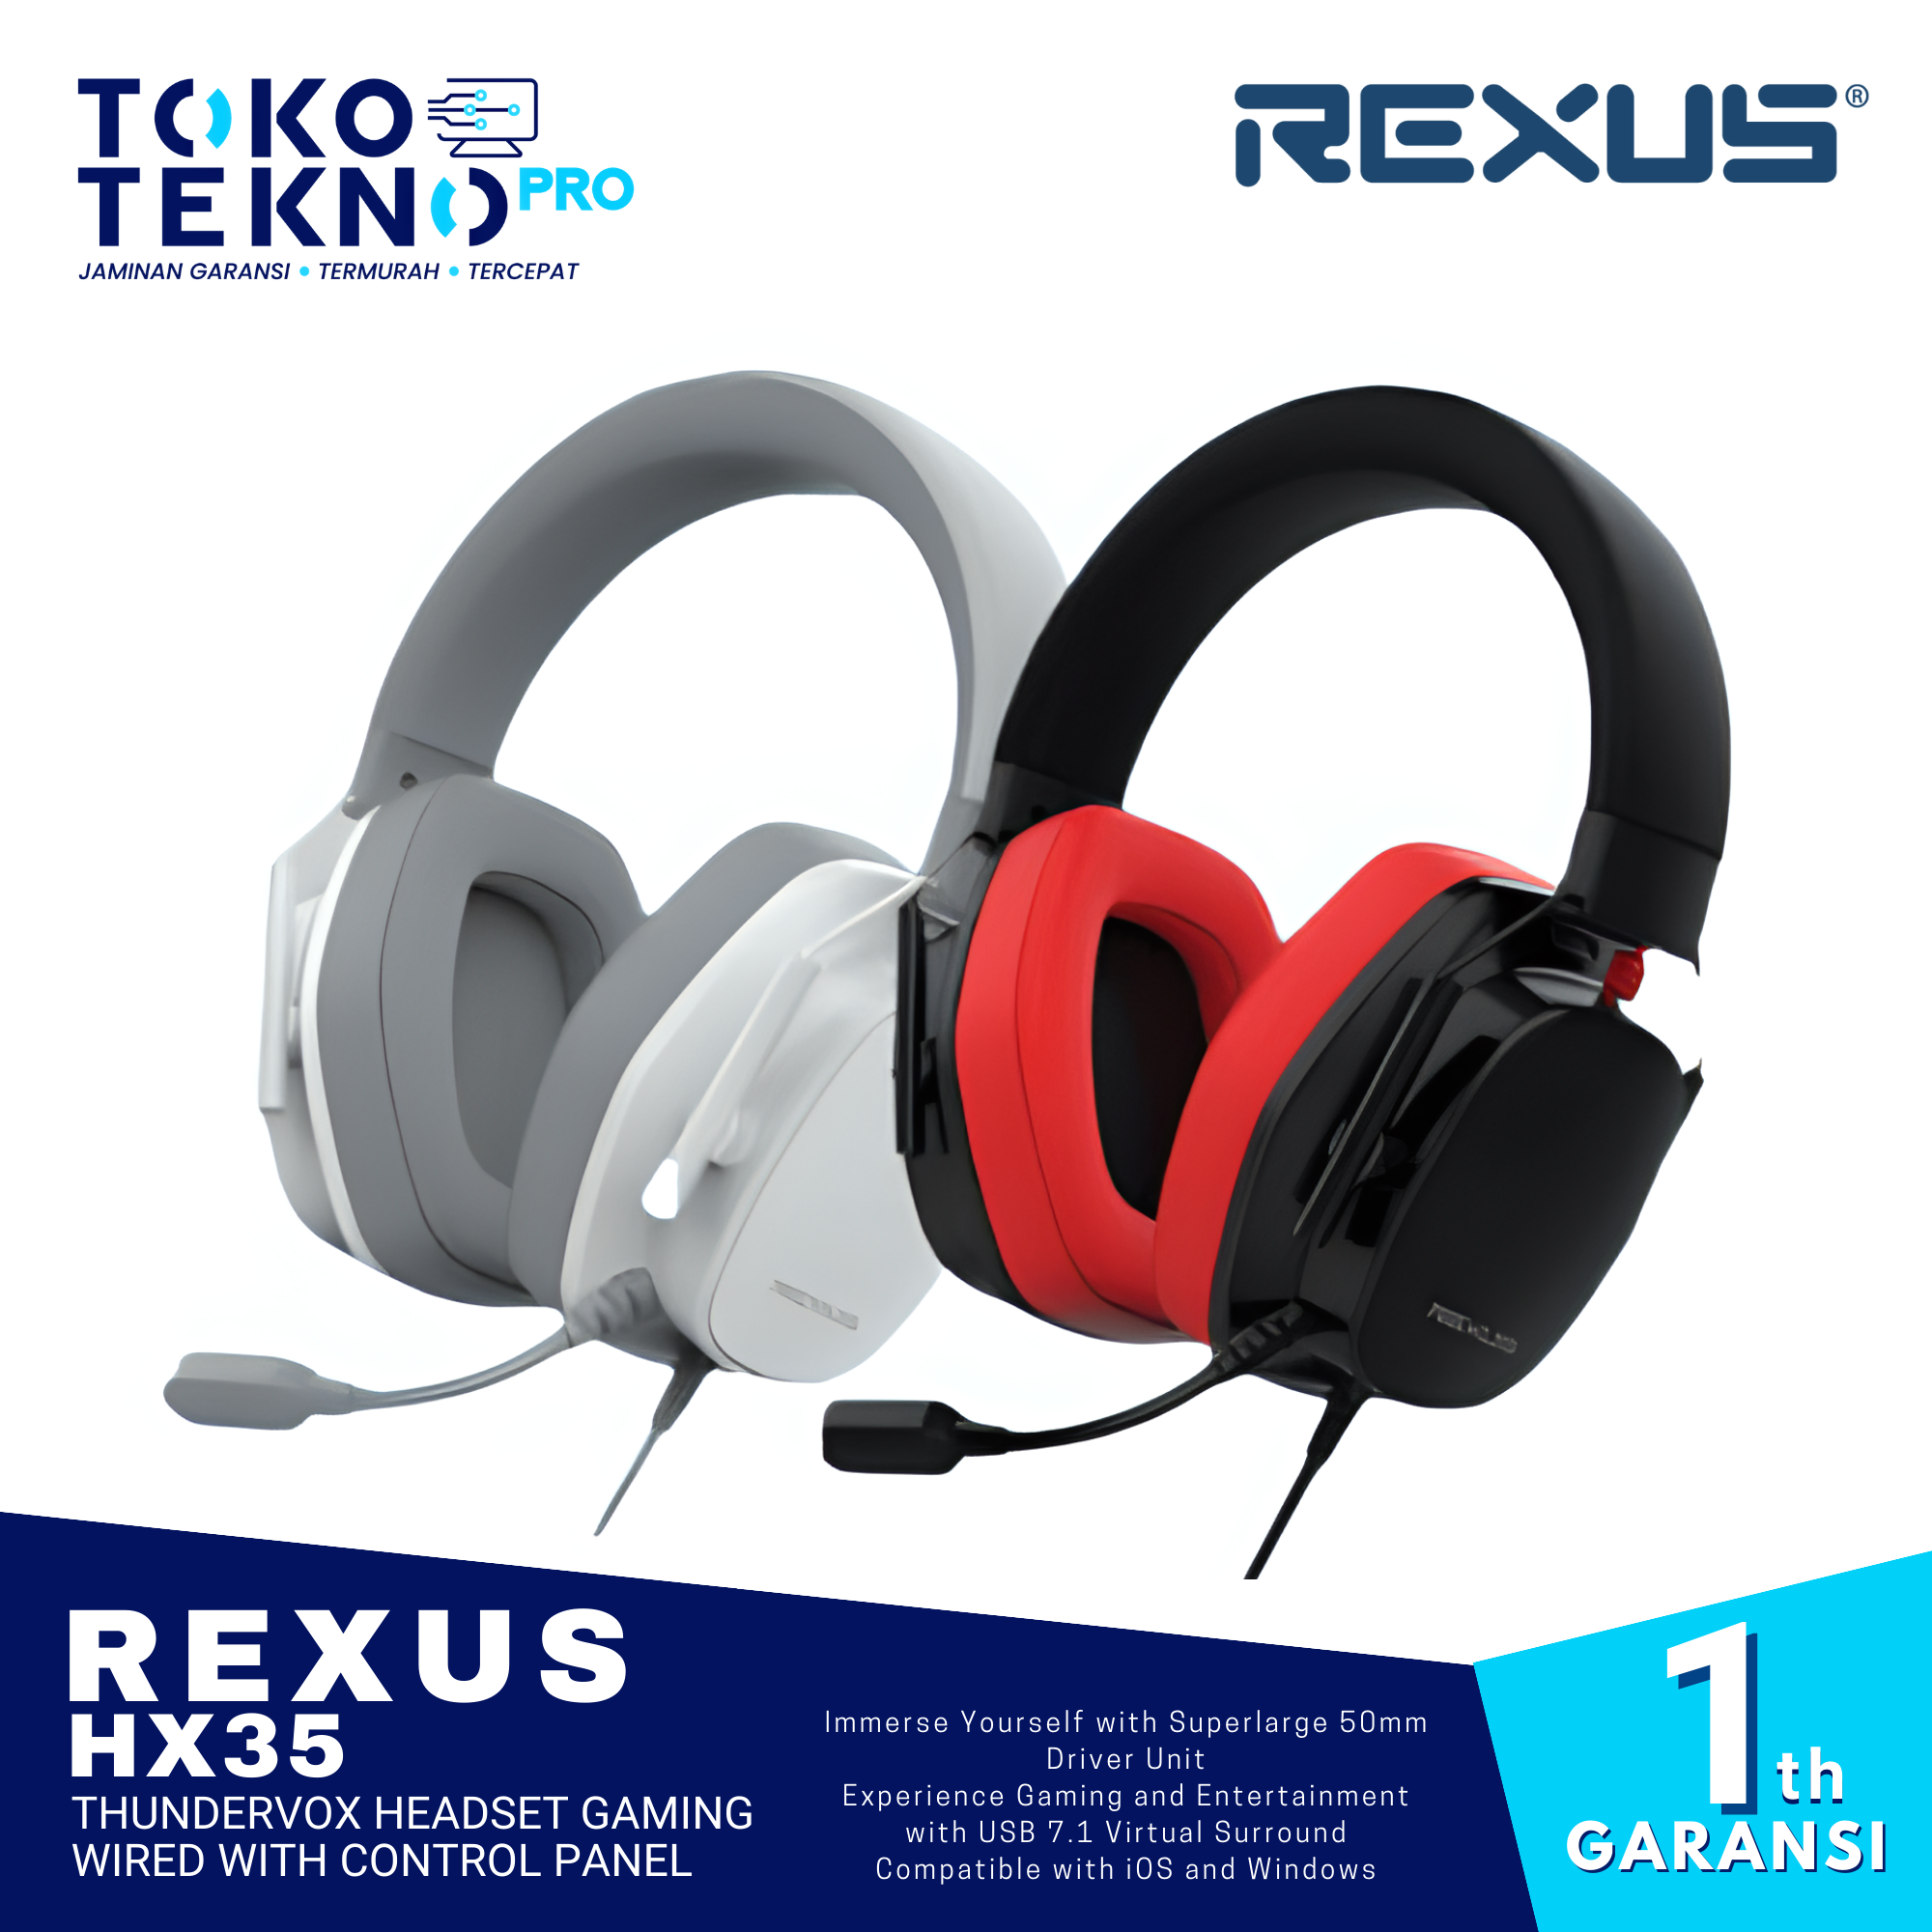 Rexus HX35 Thundervox Headset Gaming Wired WIth Control Panel